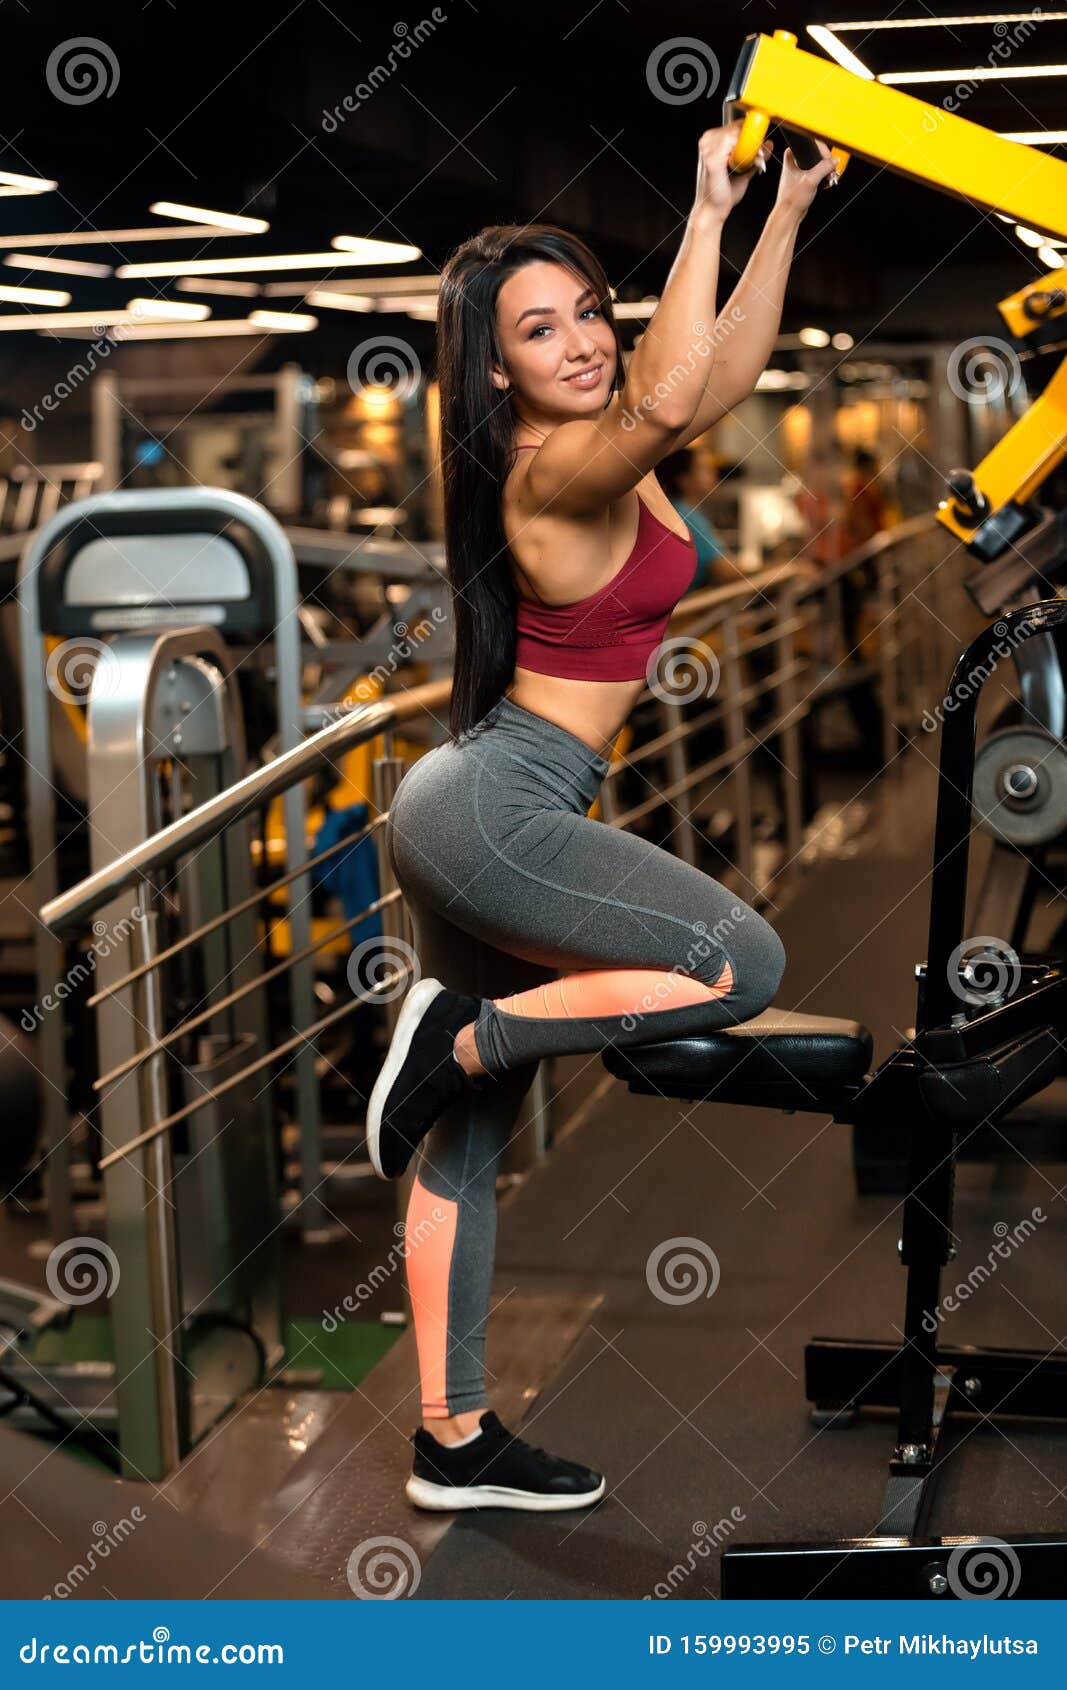 Fitness Brunette Girl is Sitting and Doing Shoulder Exercises in Trainer  Stock Image - Image of shape, beautiful: 159993995